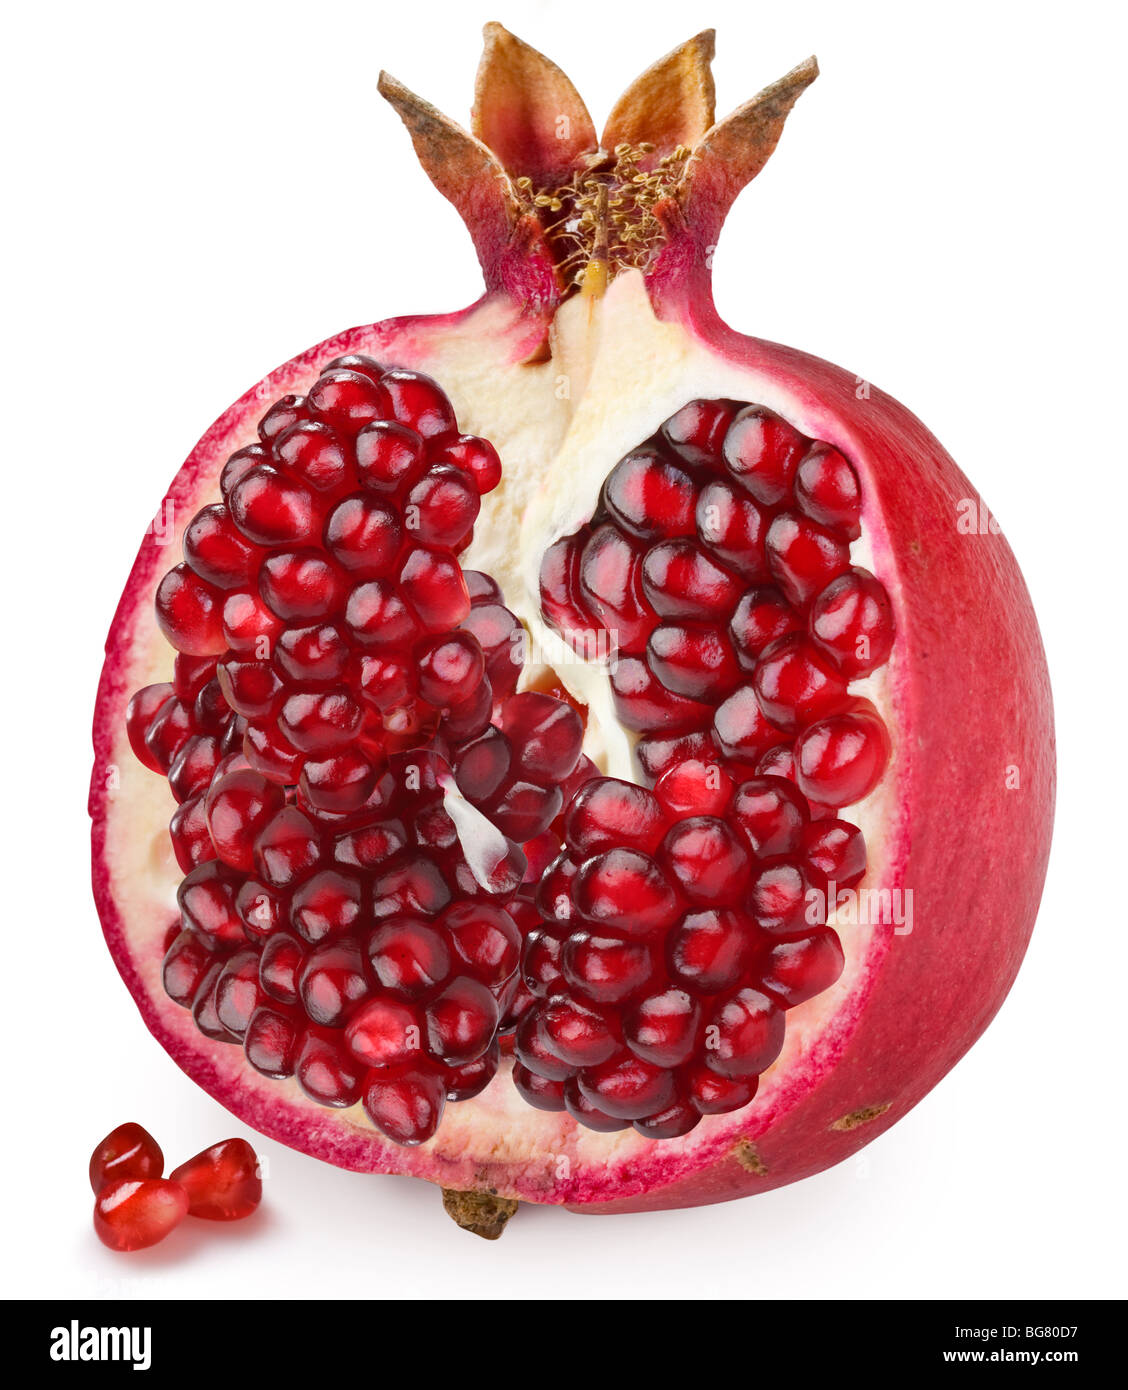 Half of pomegranate on a white background Stock Photo